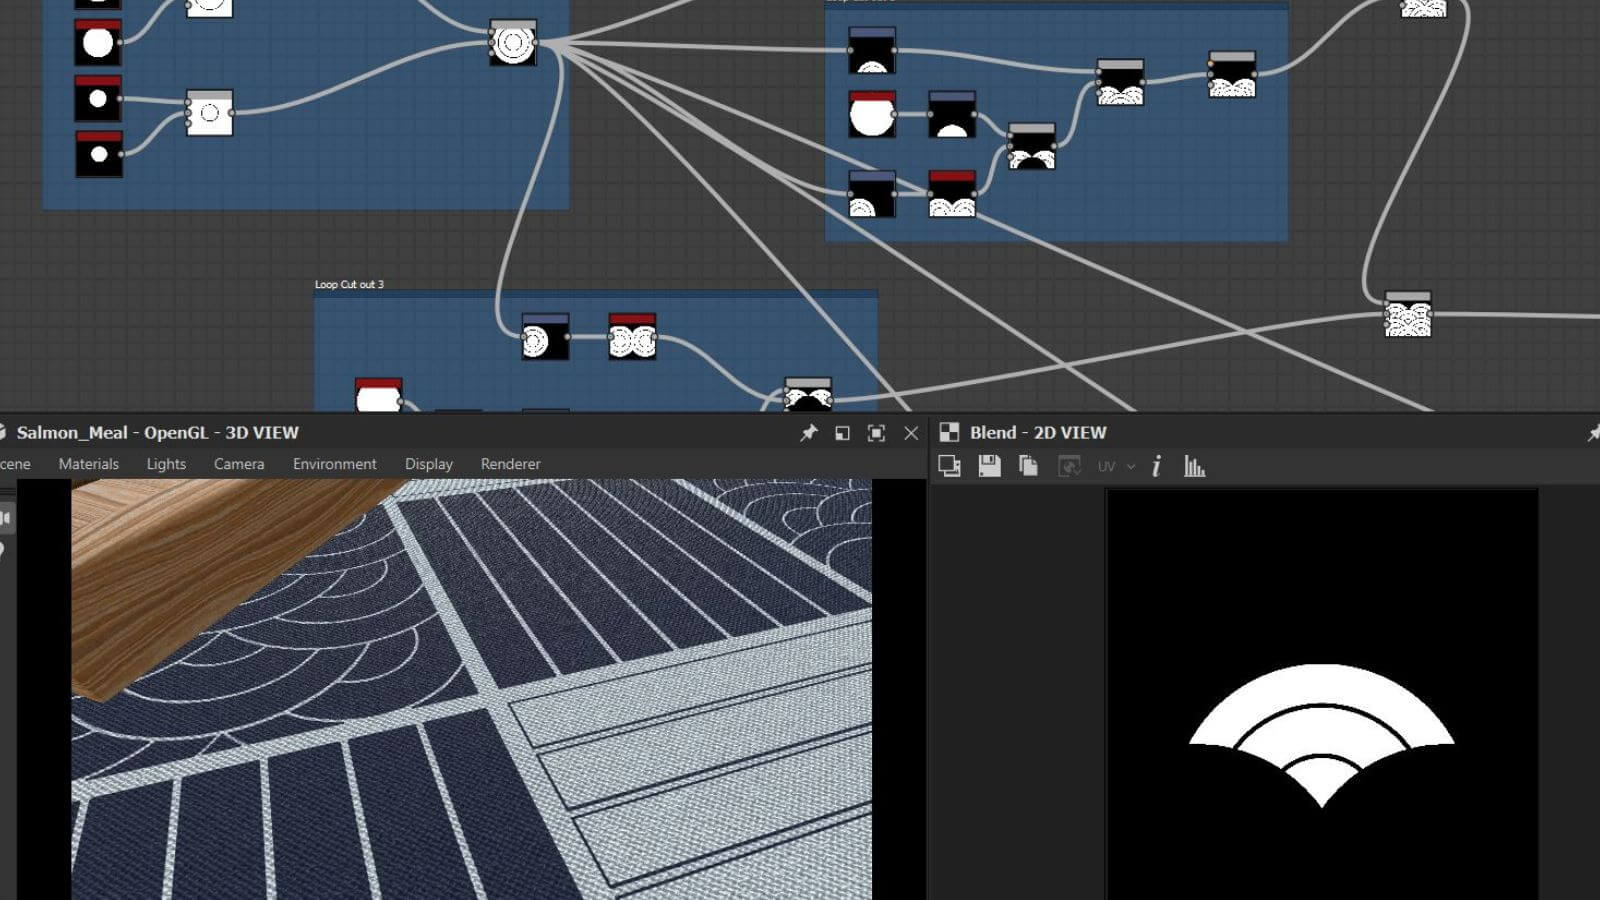 Workflow chart and close-up mat image in Substance 3D Designer